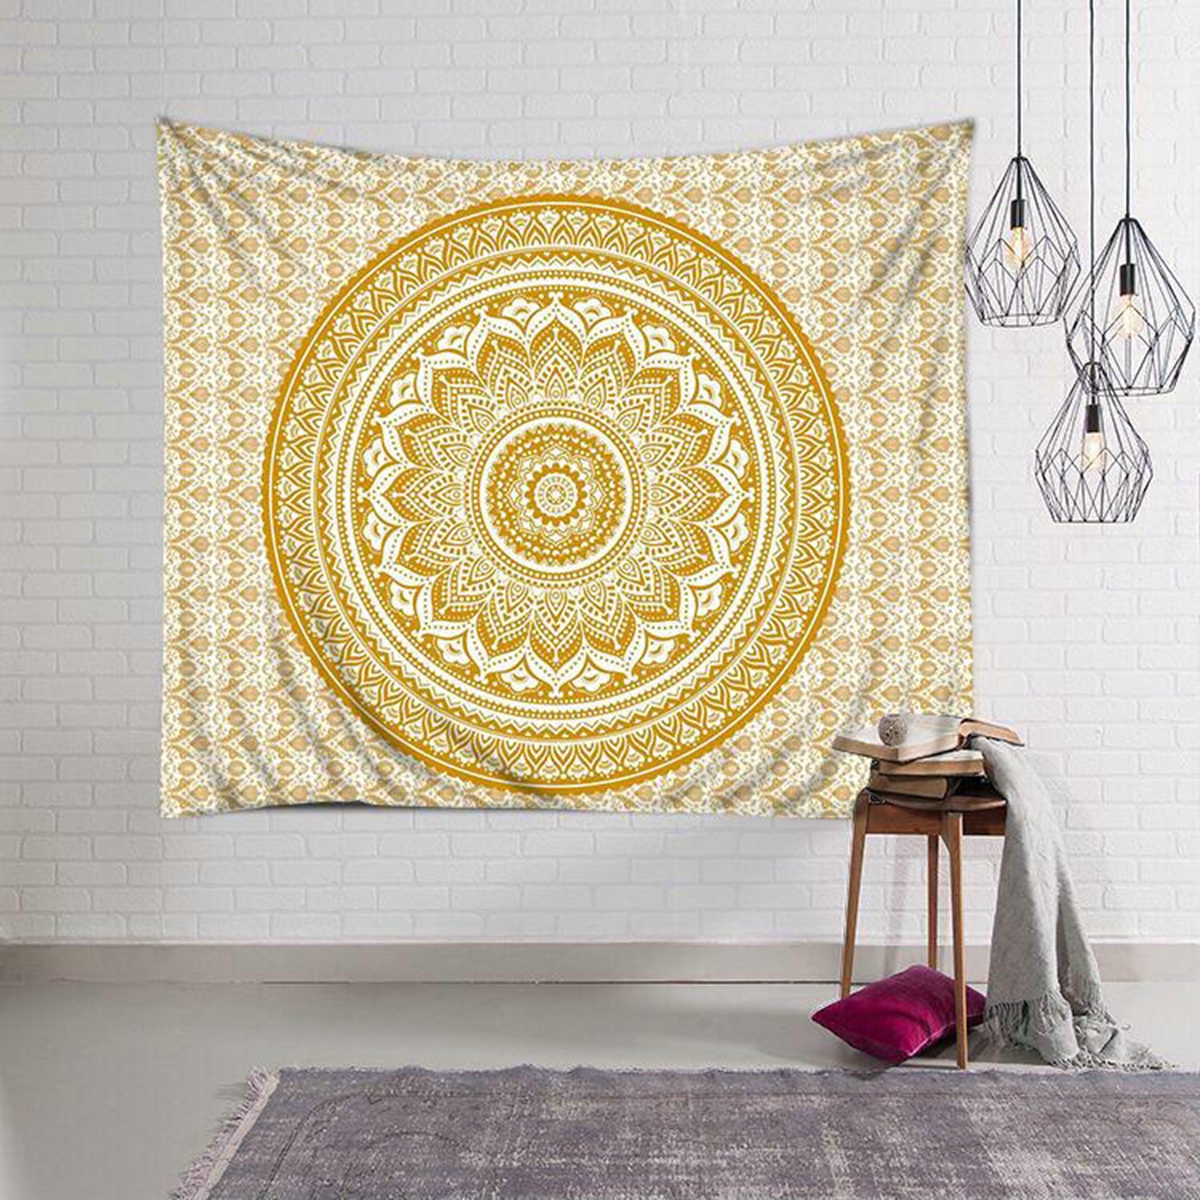 Find 210 150cm Mandala Tapestry Room Wall Hanging Art Tapestry Pictures Camping Tent Sofa Cover Bedspread Home Office Decoration for Sale on Gipsybee.com with cryptocurrencies